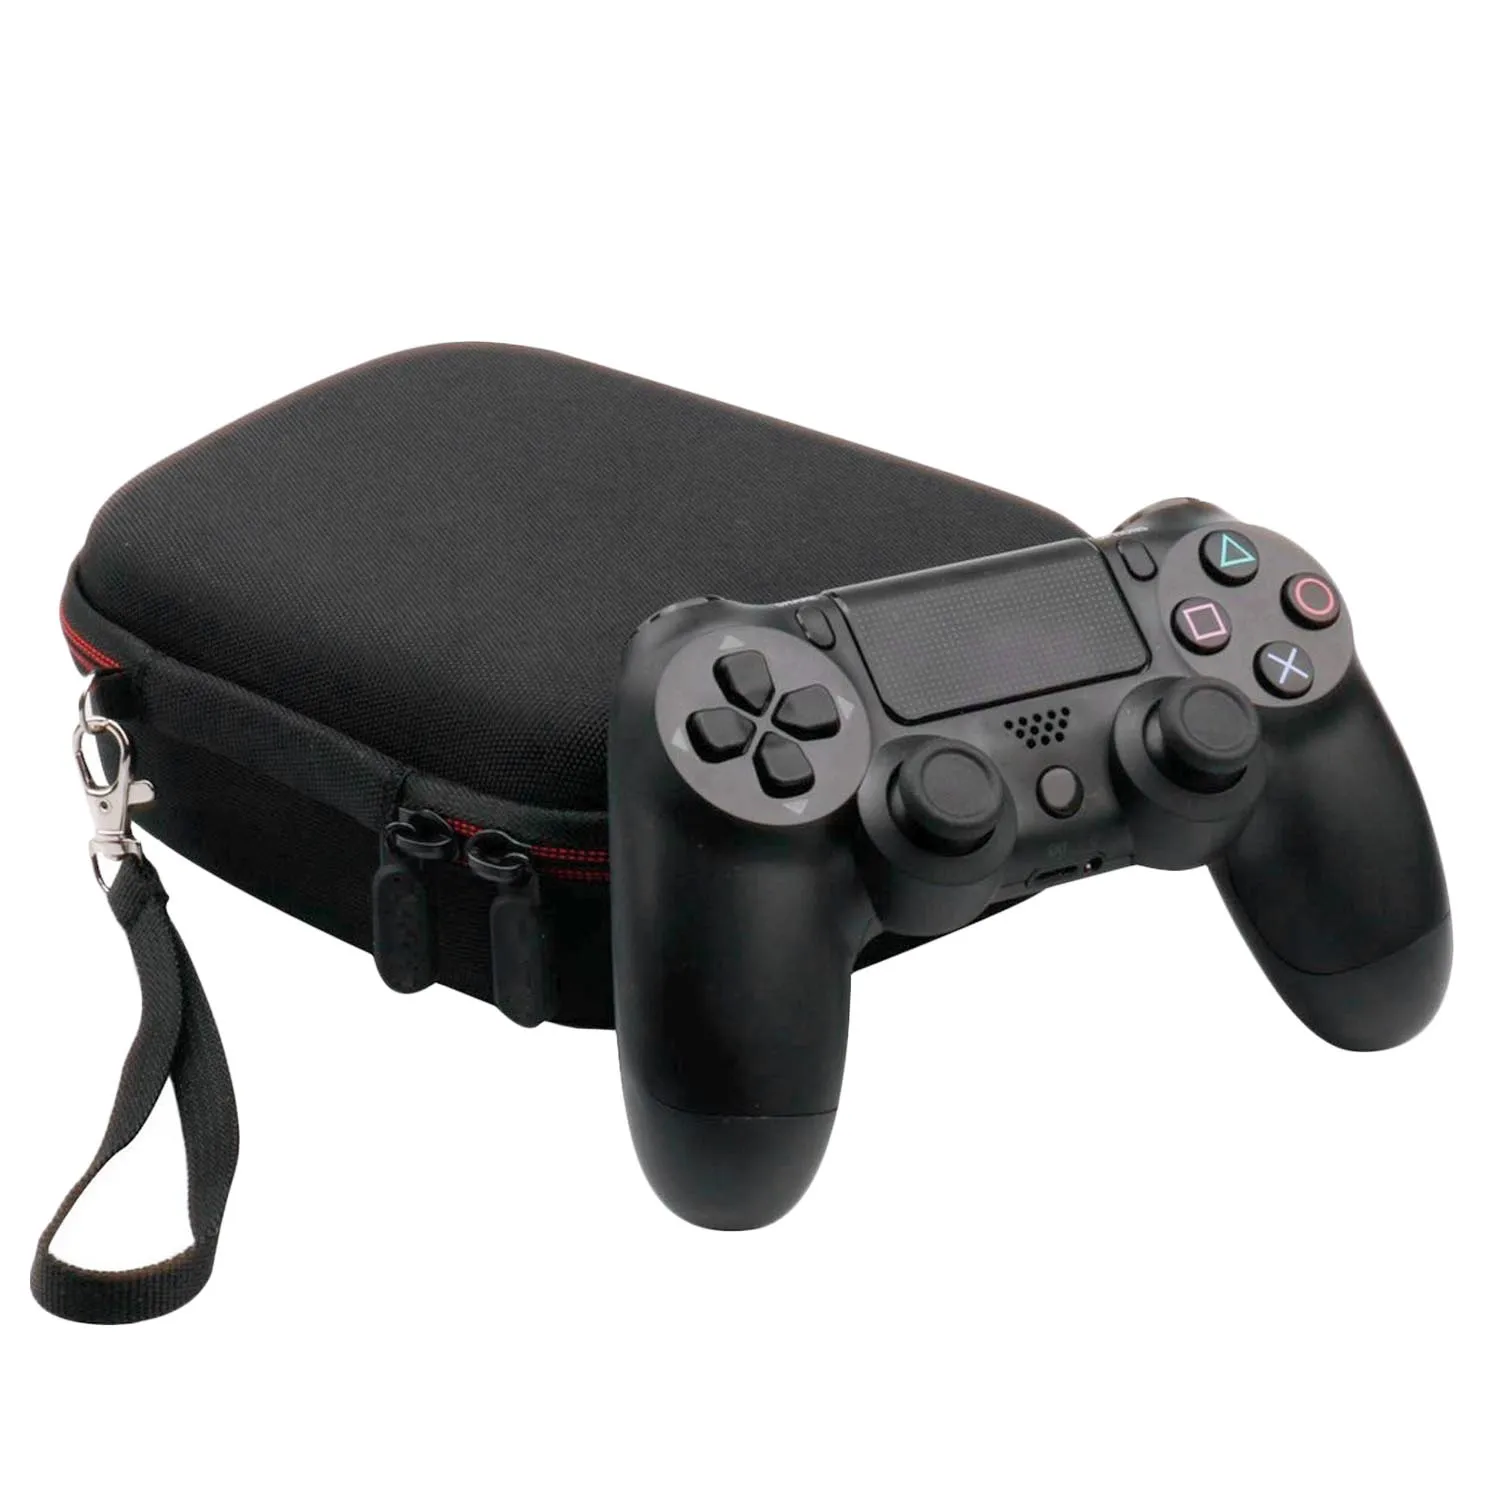 

Bevigac Portable Shockproof Carrying Bag Case Pouch Storage Box for Sony PlayStation DualShock 4 PS4 Wireless Controller Gamepad